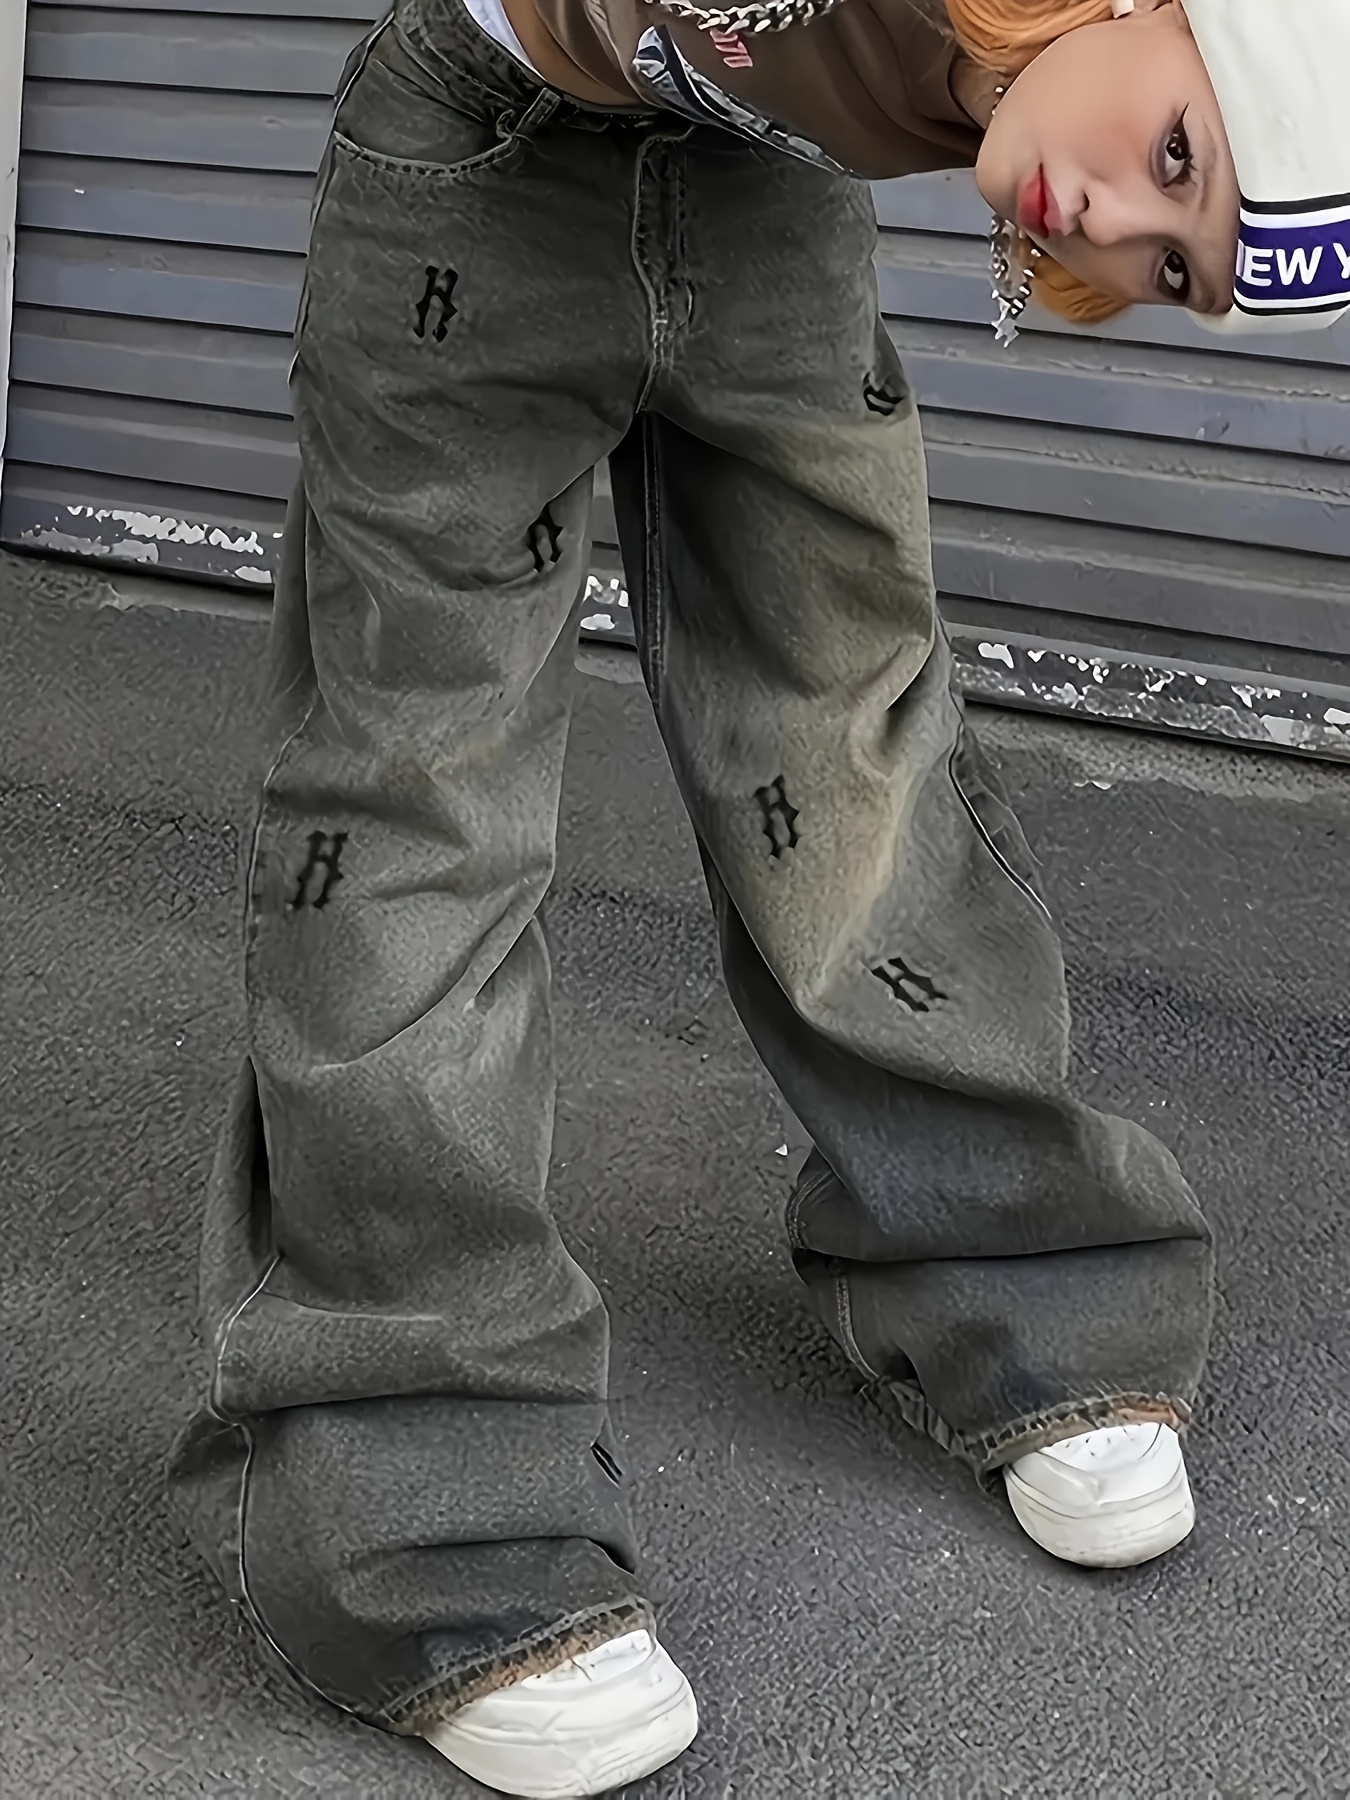 LOW-RISE Y2K STYLE BAGGY JEANS